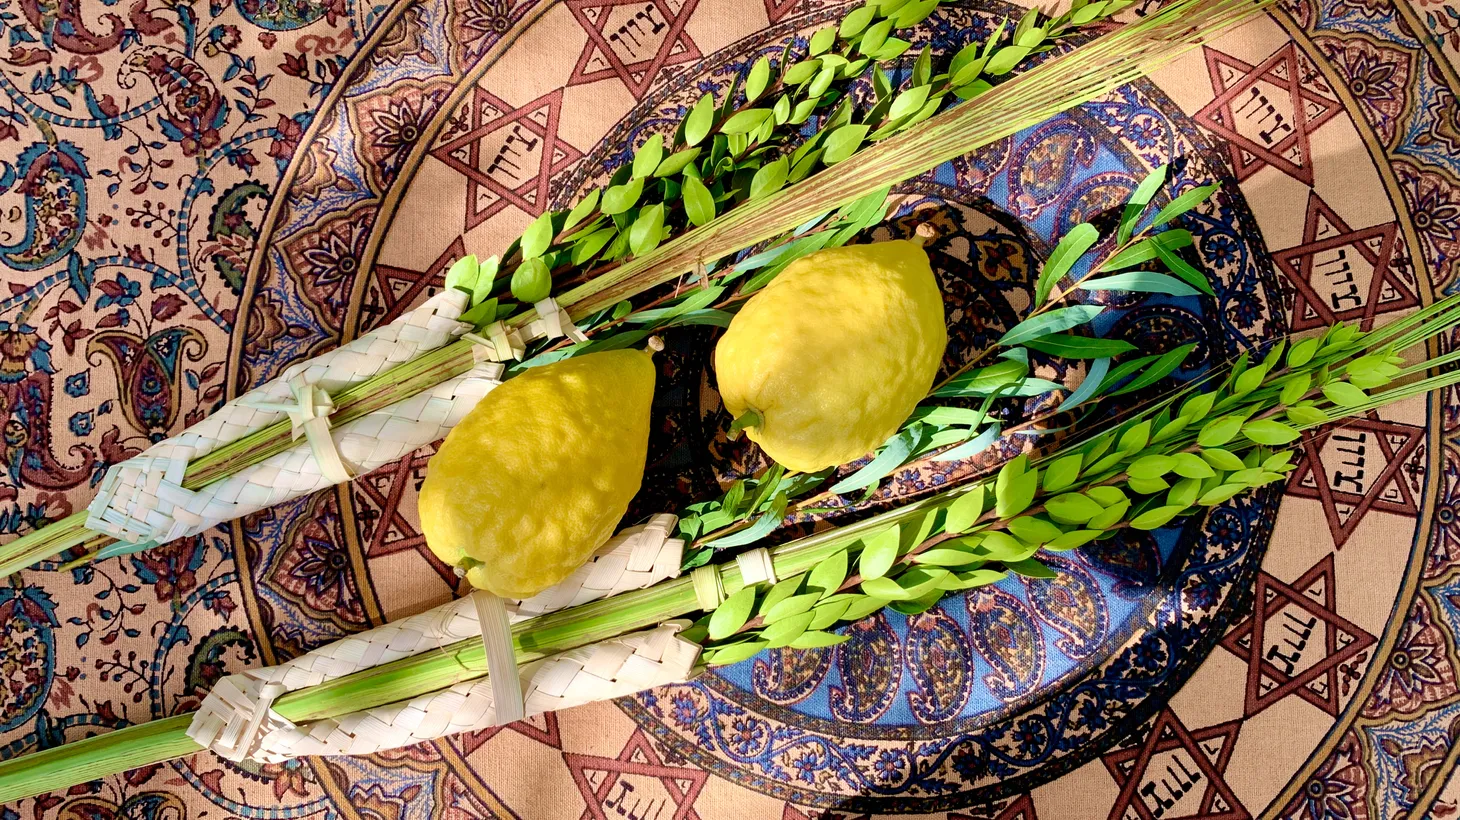 A palm branch (lulav), two willows (aravot), a minimum of three myrtles (hadassim) and one citron (etrog) are the four symbols of vegetation in a Sukkot celebration.